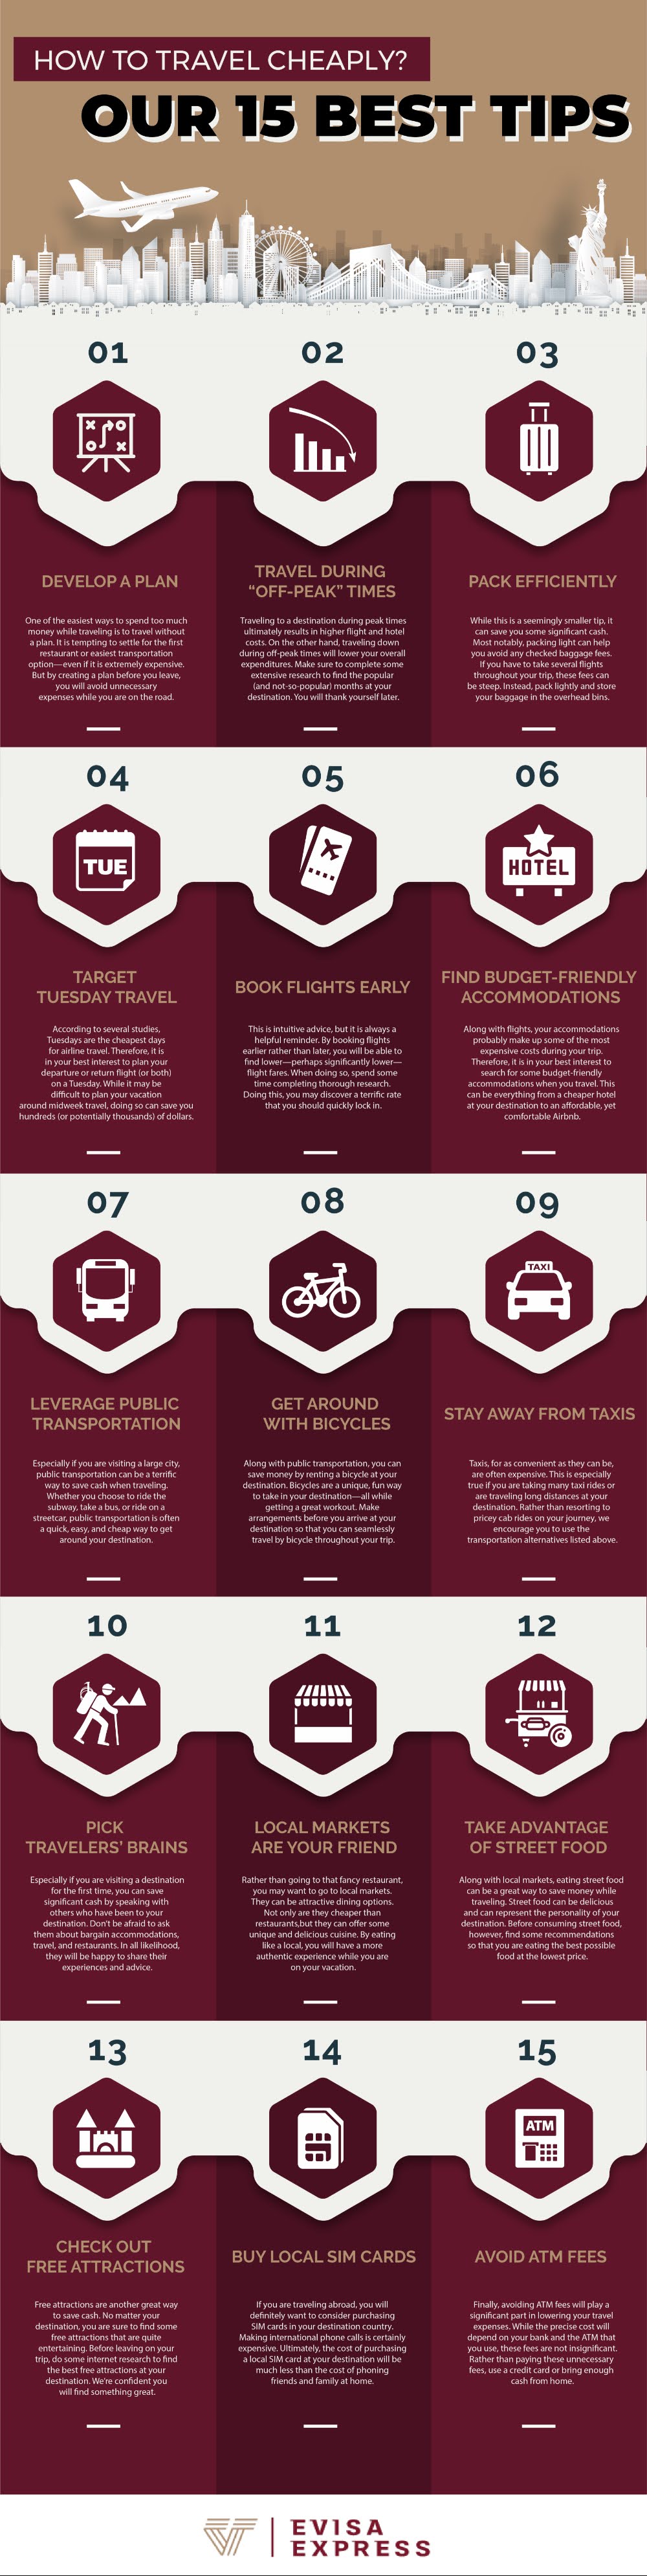 how-to-travel-cheap-our-15-best-tips-infographic